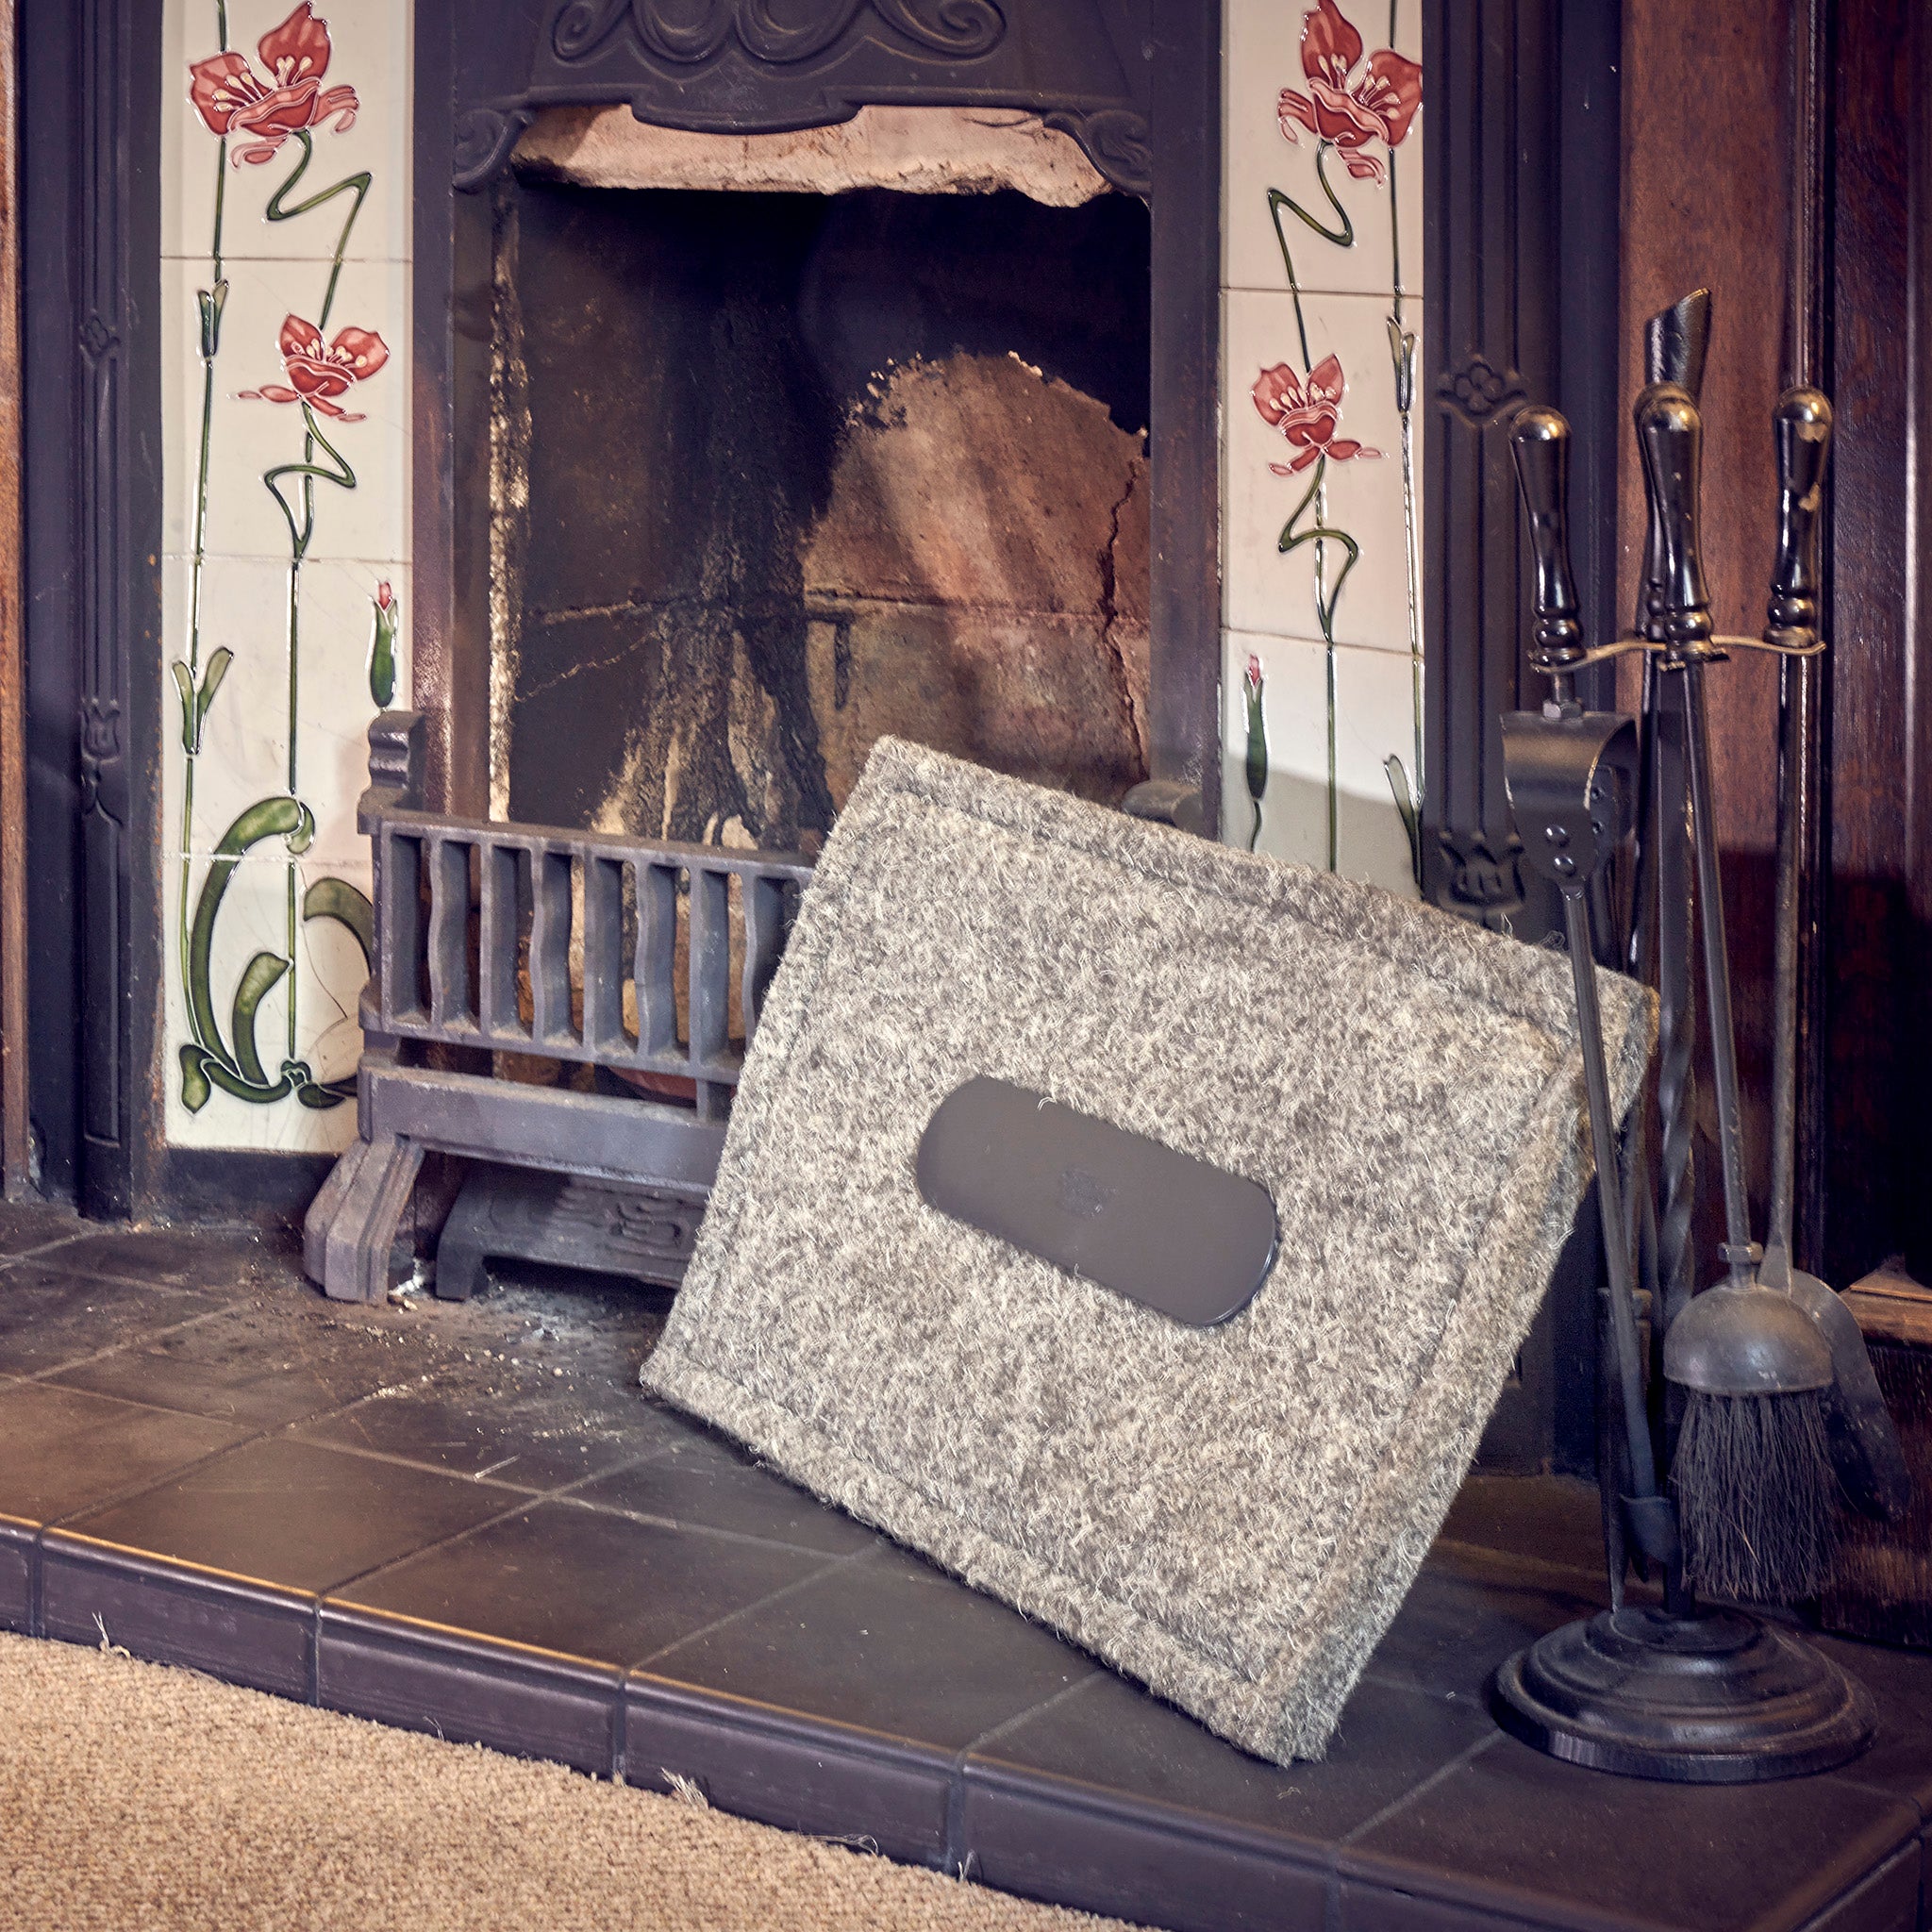 A removable Chimney Sheep chimney draught excluder leaning against an open fireplace.